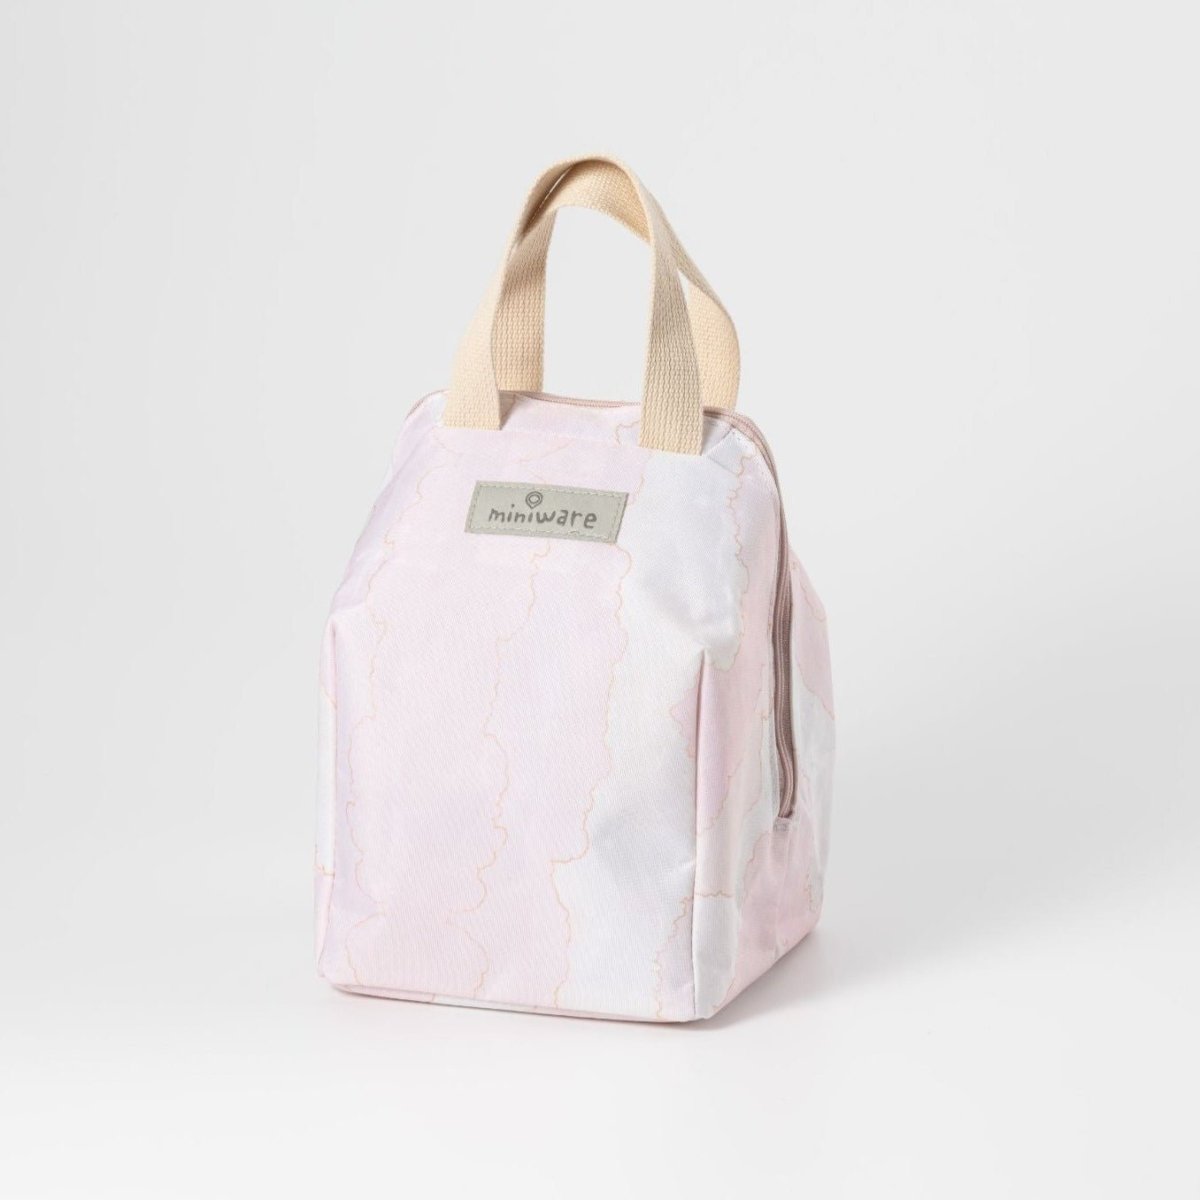 Miniware Mealtote Insulated Lunch Bag- Pink Cloud - MTPC